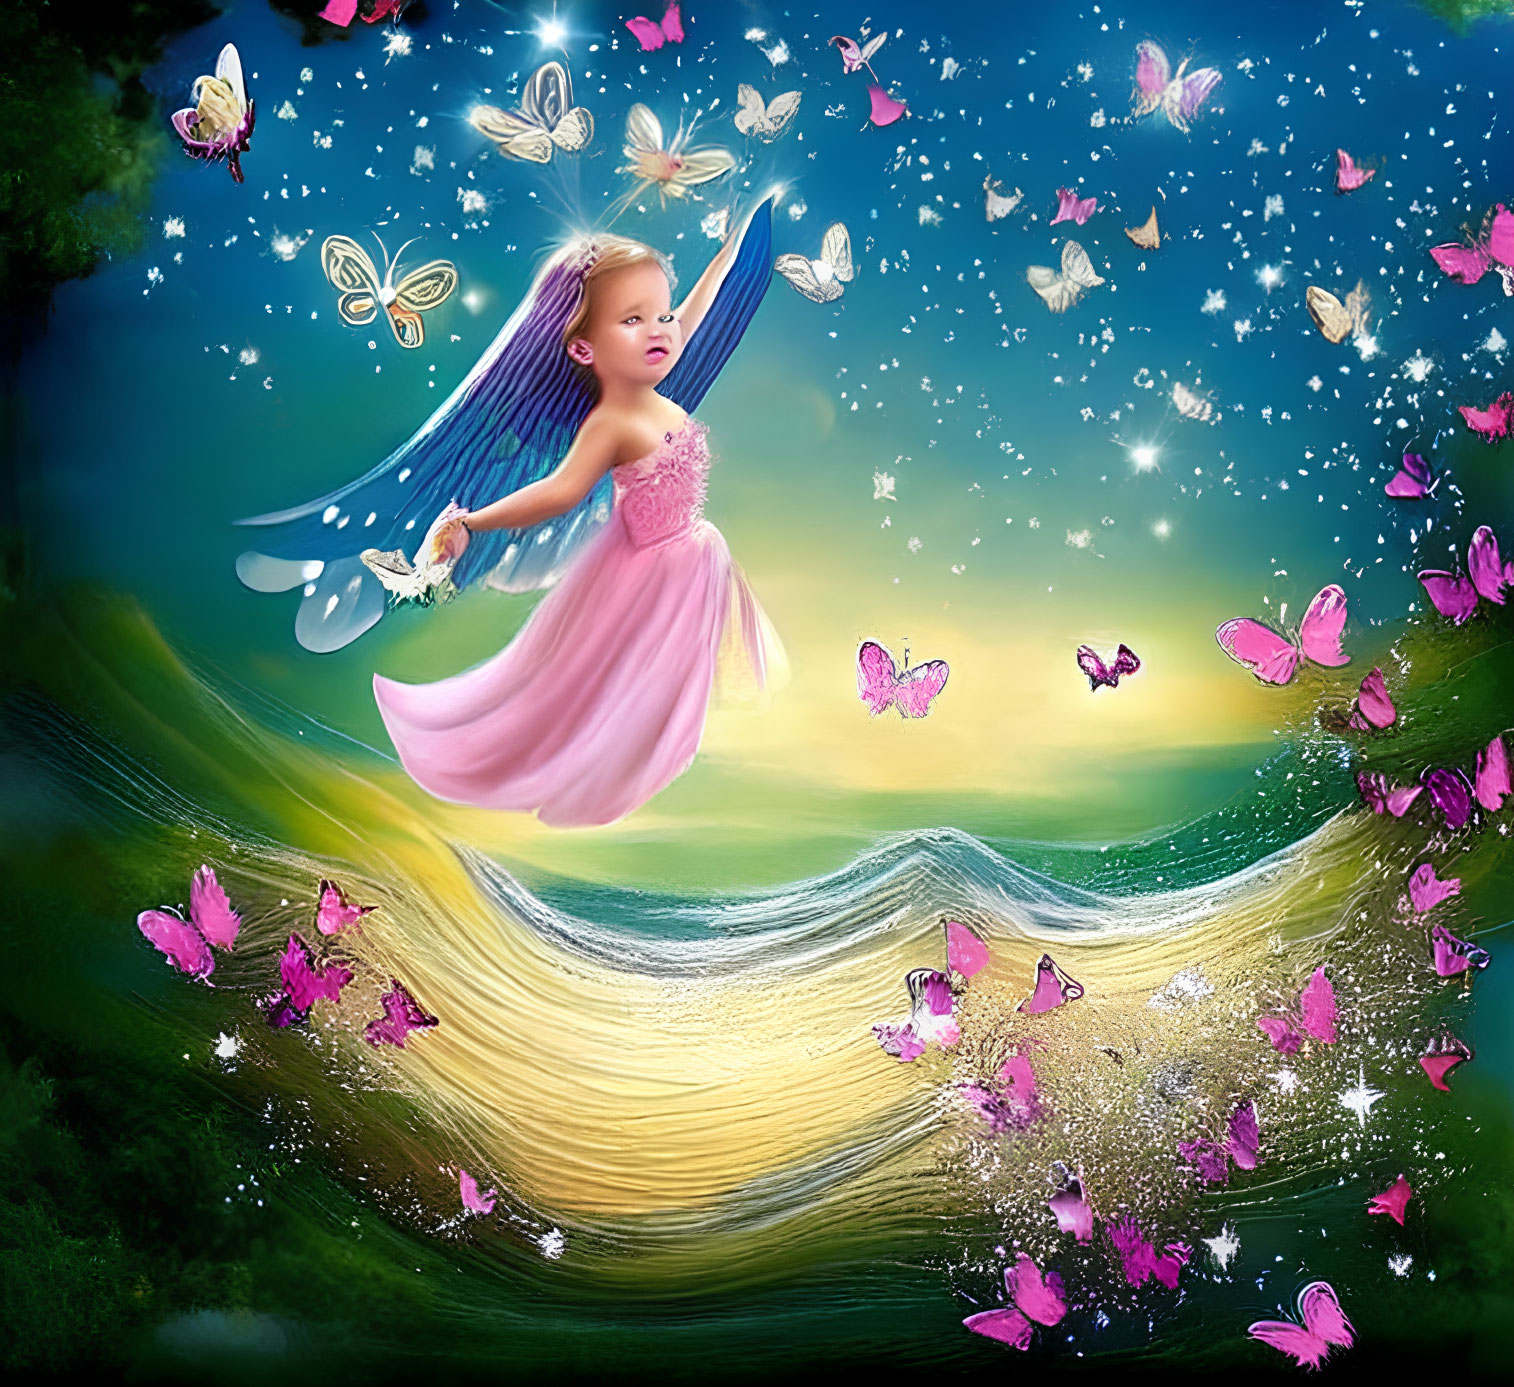 Young girl with fairy wings and butterflies in dreamlike setting